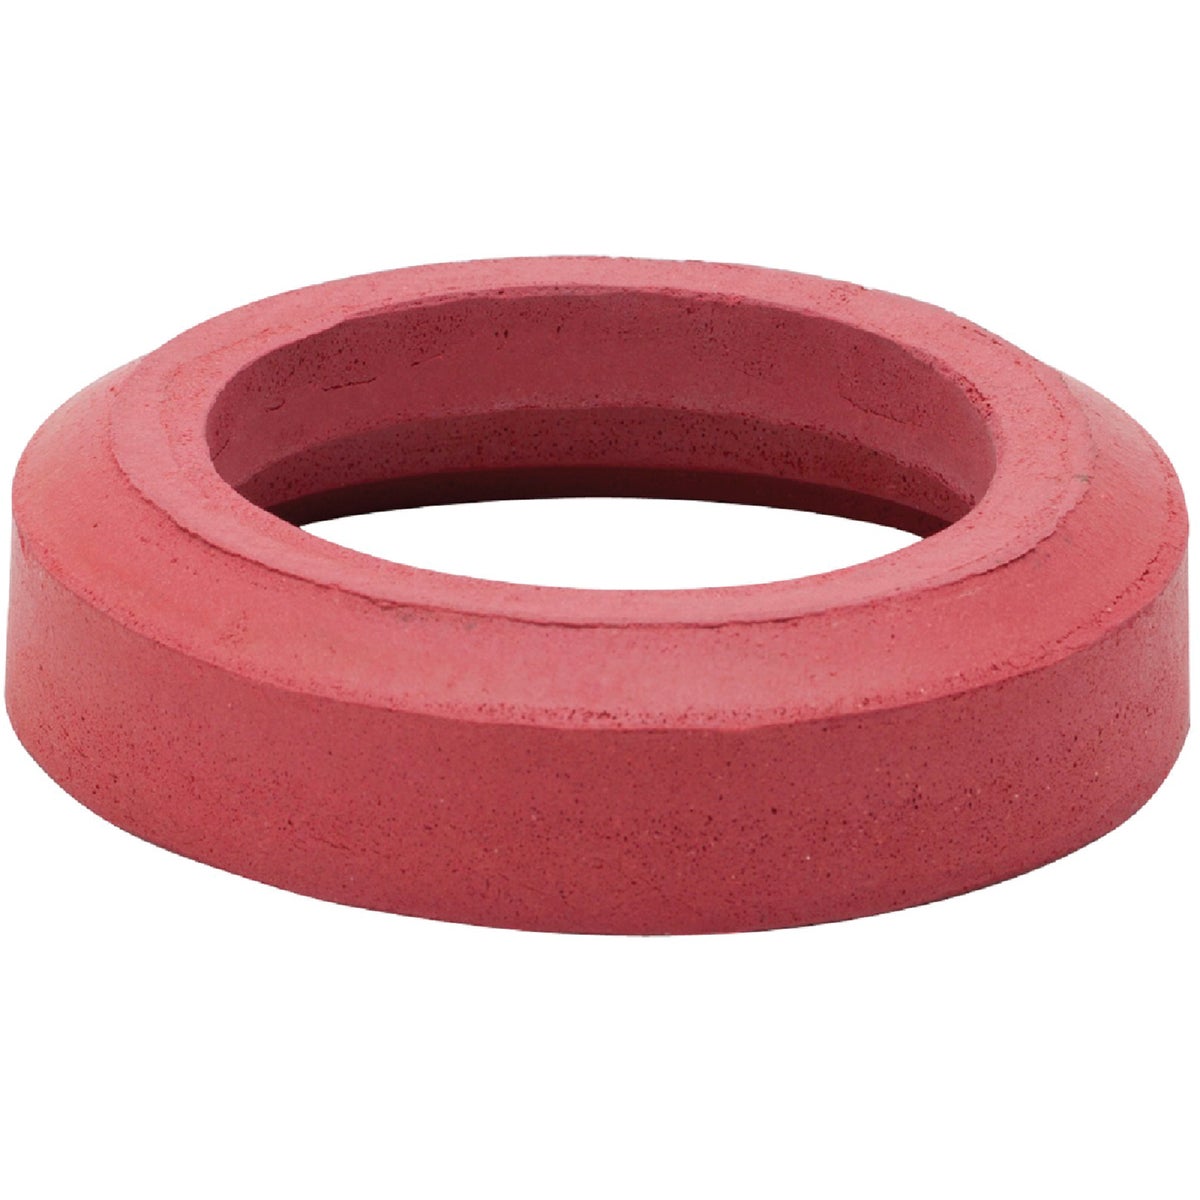 Item 405134, Tank-to-Bowl Gasket is the genuine replacement part for the American 